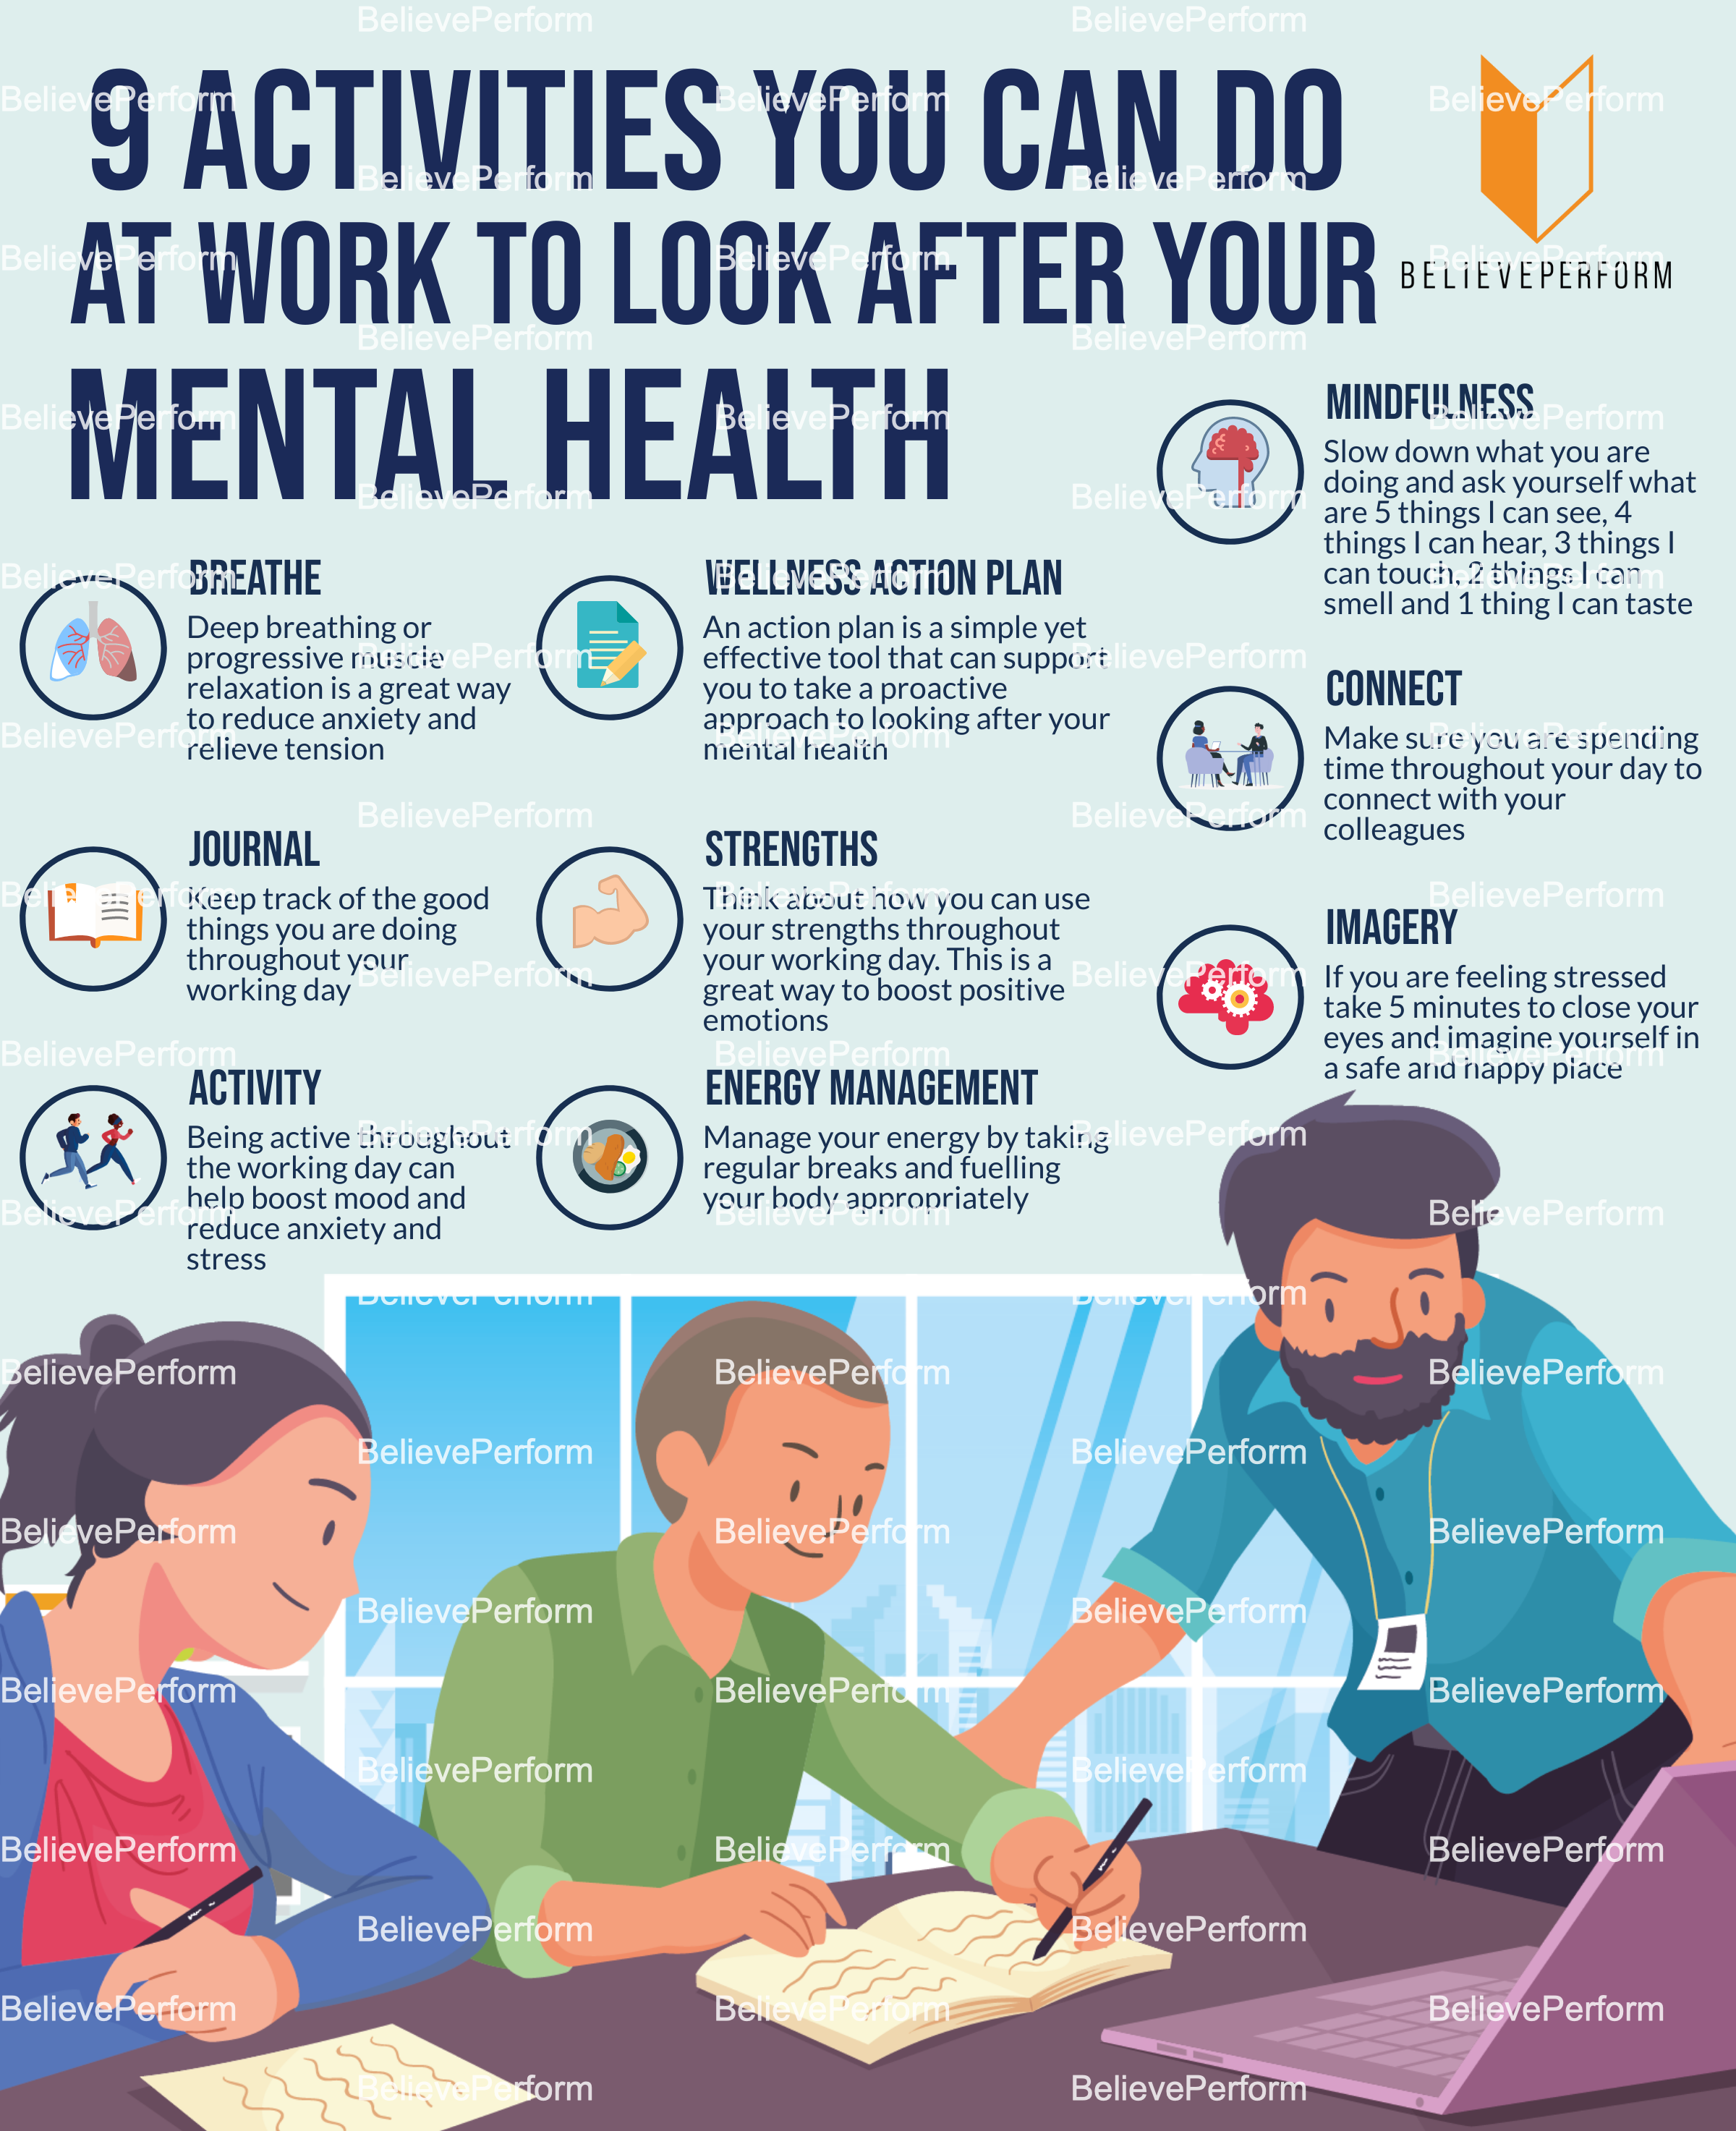 9 activities you can do at work to look after your mental health